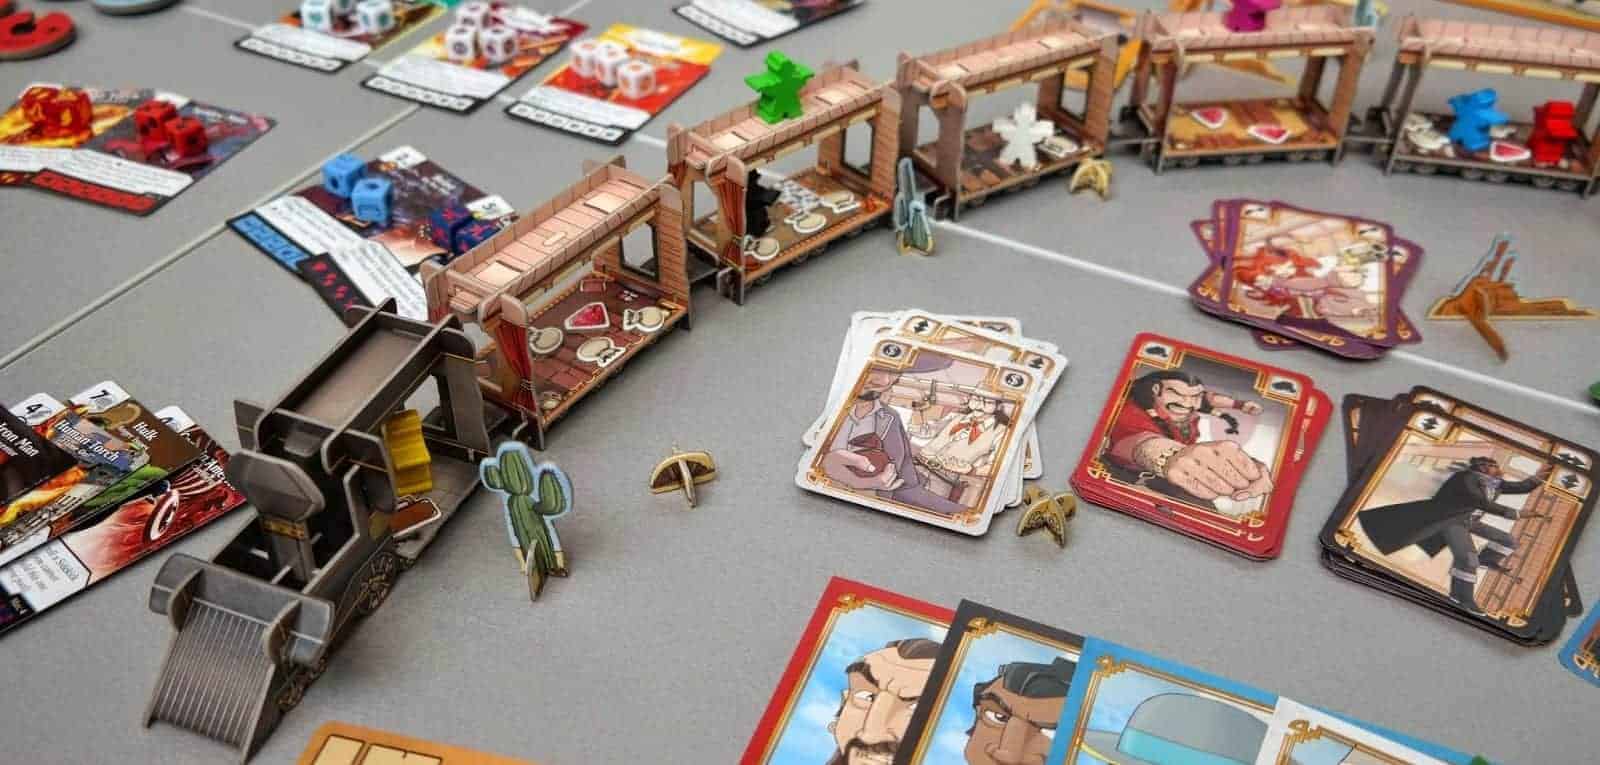 If you like 3D miniatures then Colt Express is one of the best family games around.